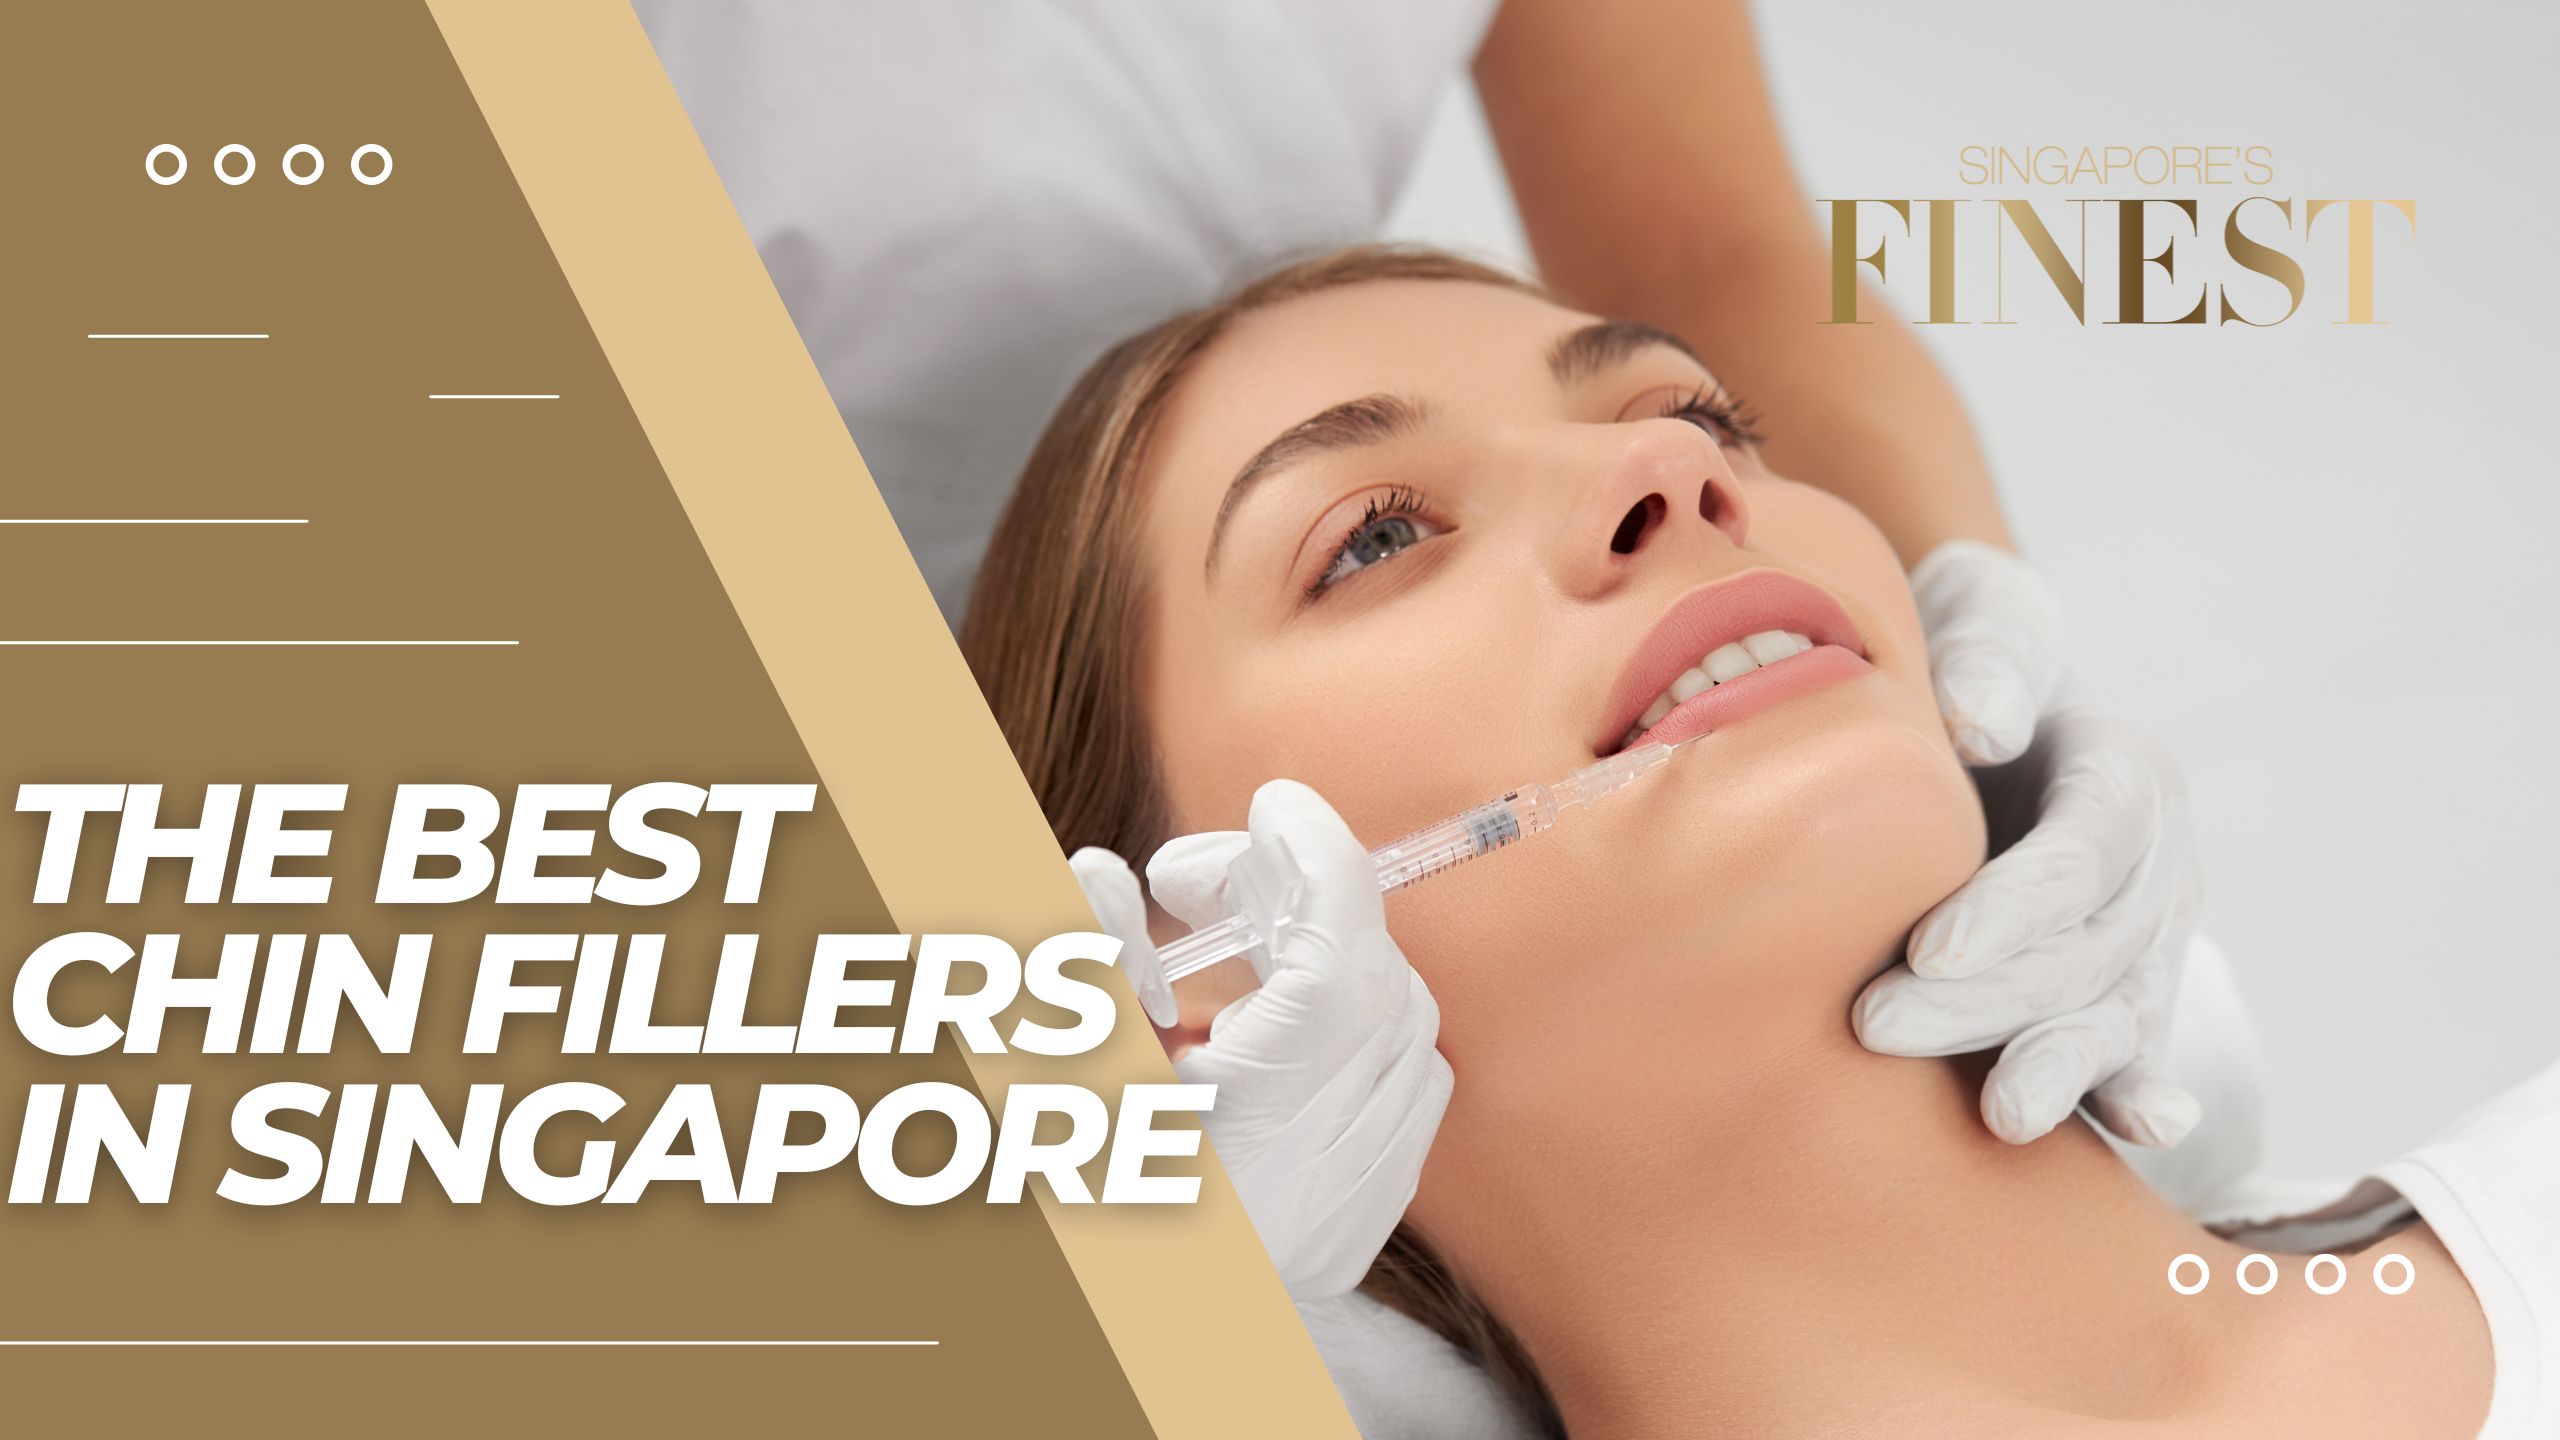 The Finest Chin Fillers in Singapore